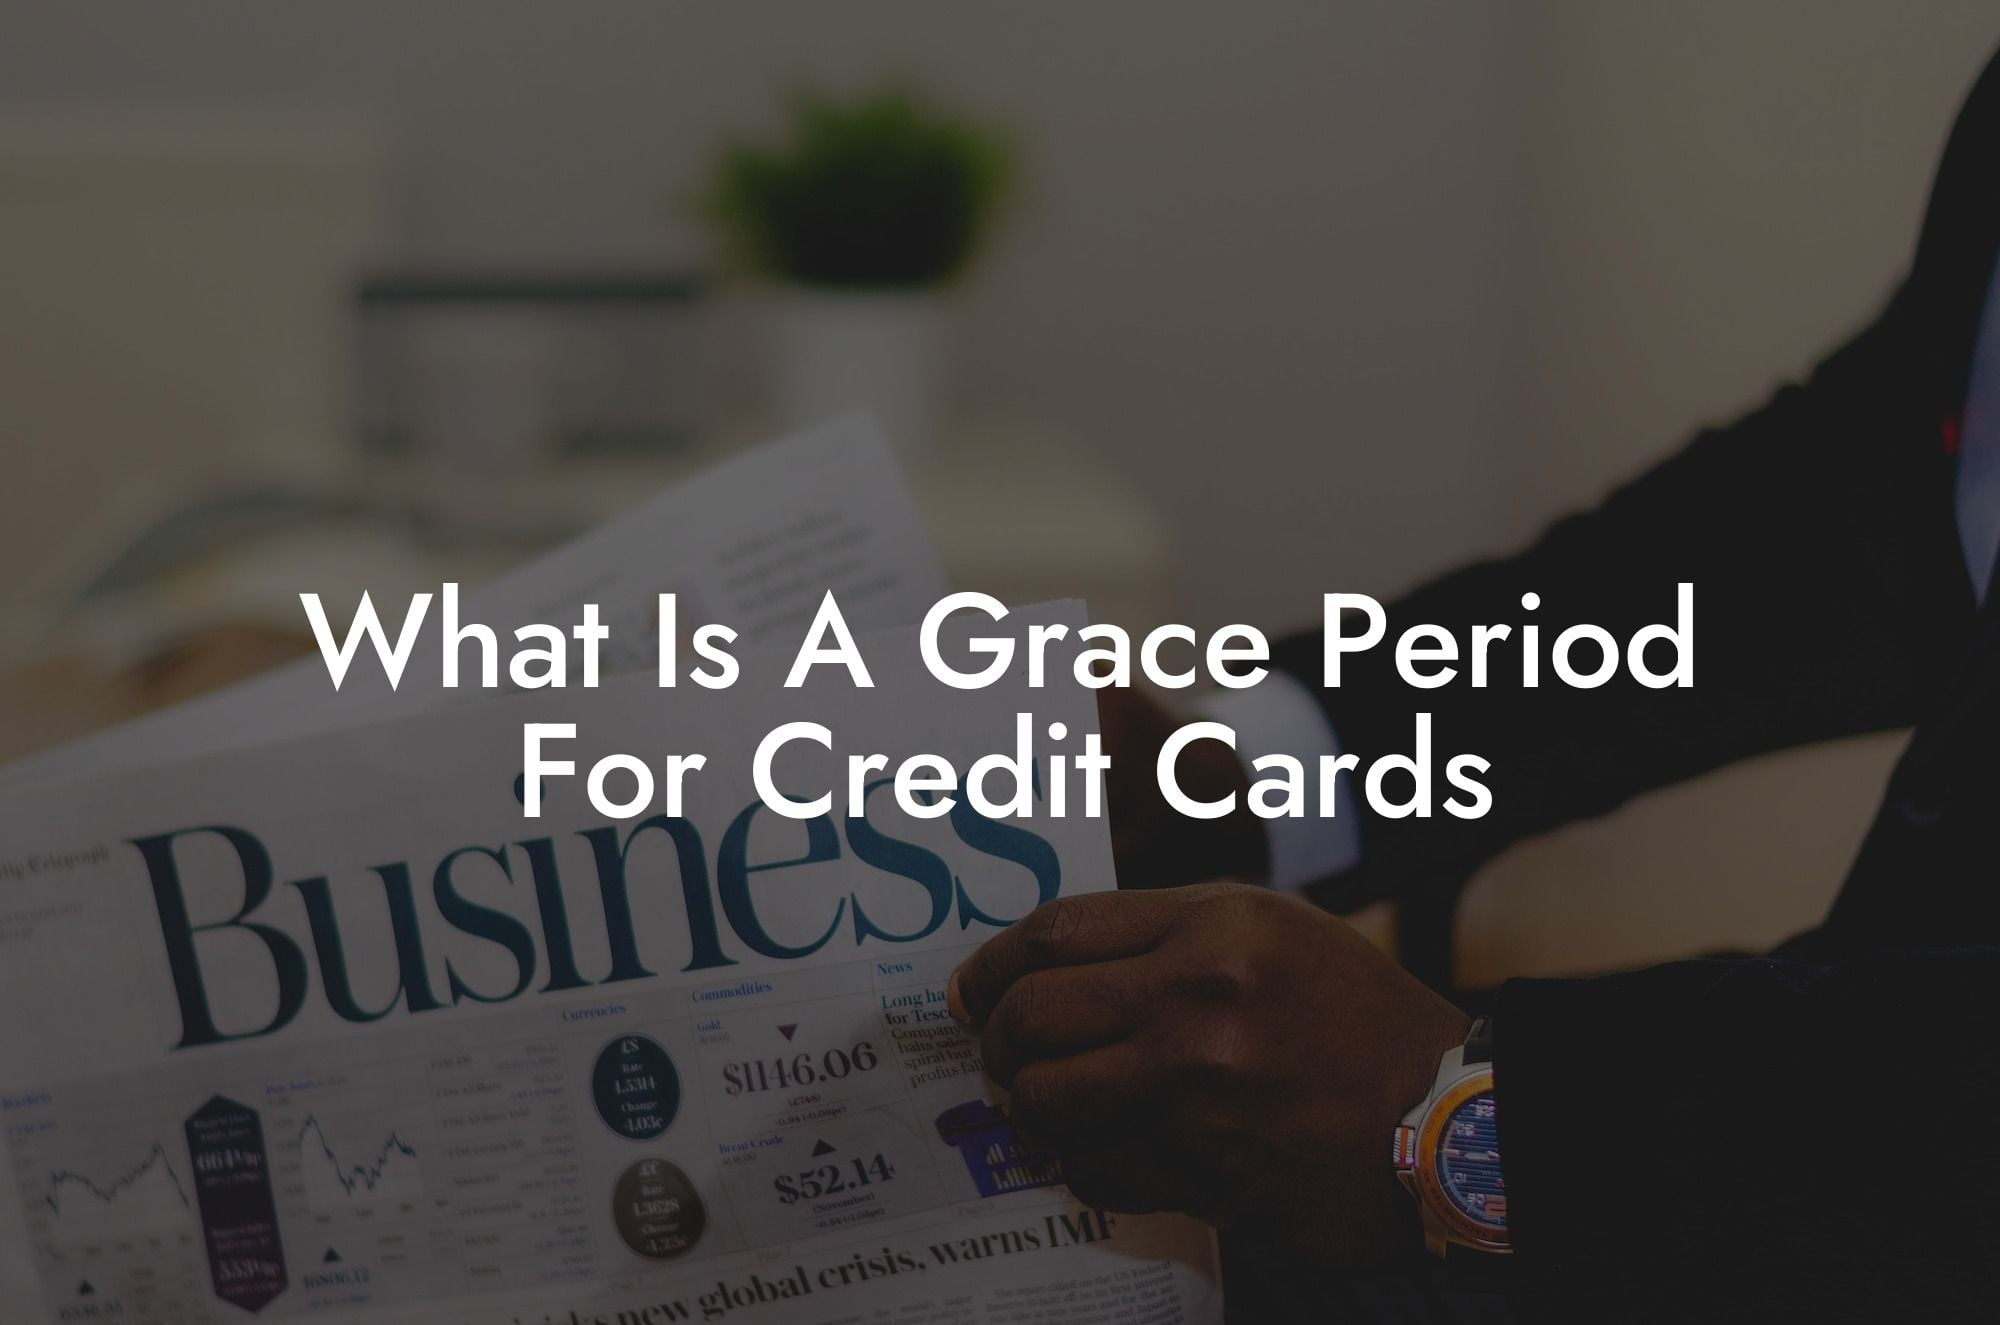 What Is A Grace Period For Credit Cards